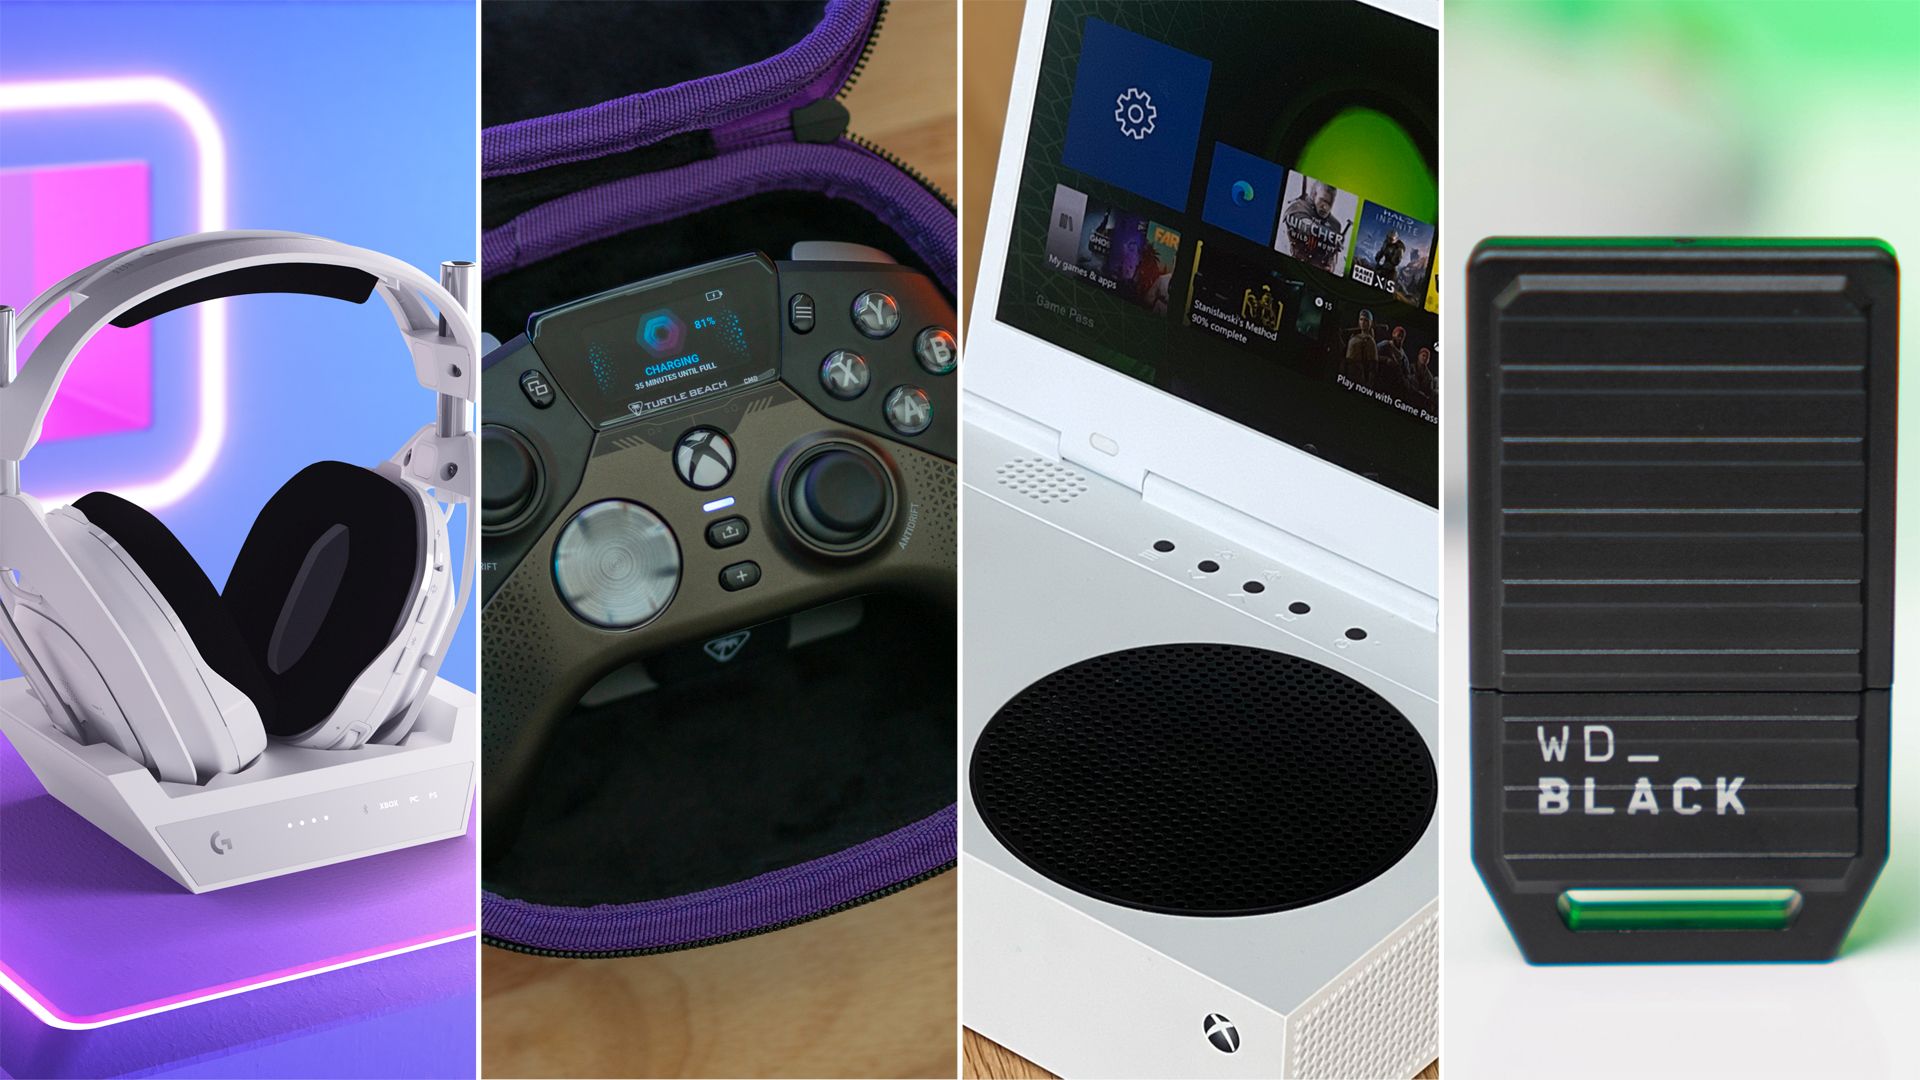 Black Friday: Celebrate Play with Xbox Games, Gaming PCs, and Accessories -  Xbox Wire